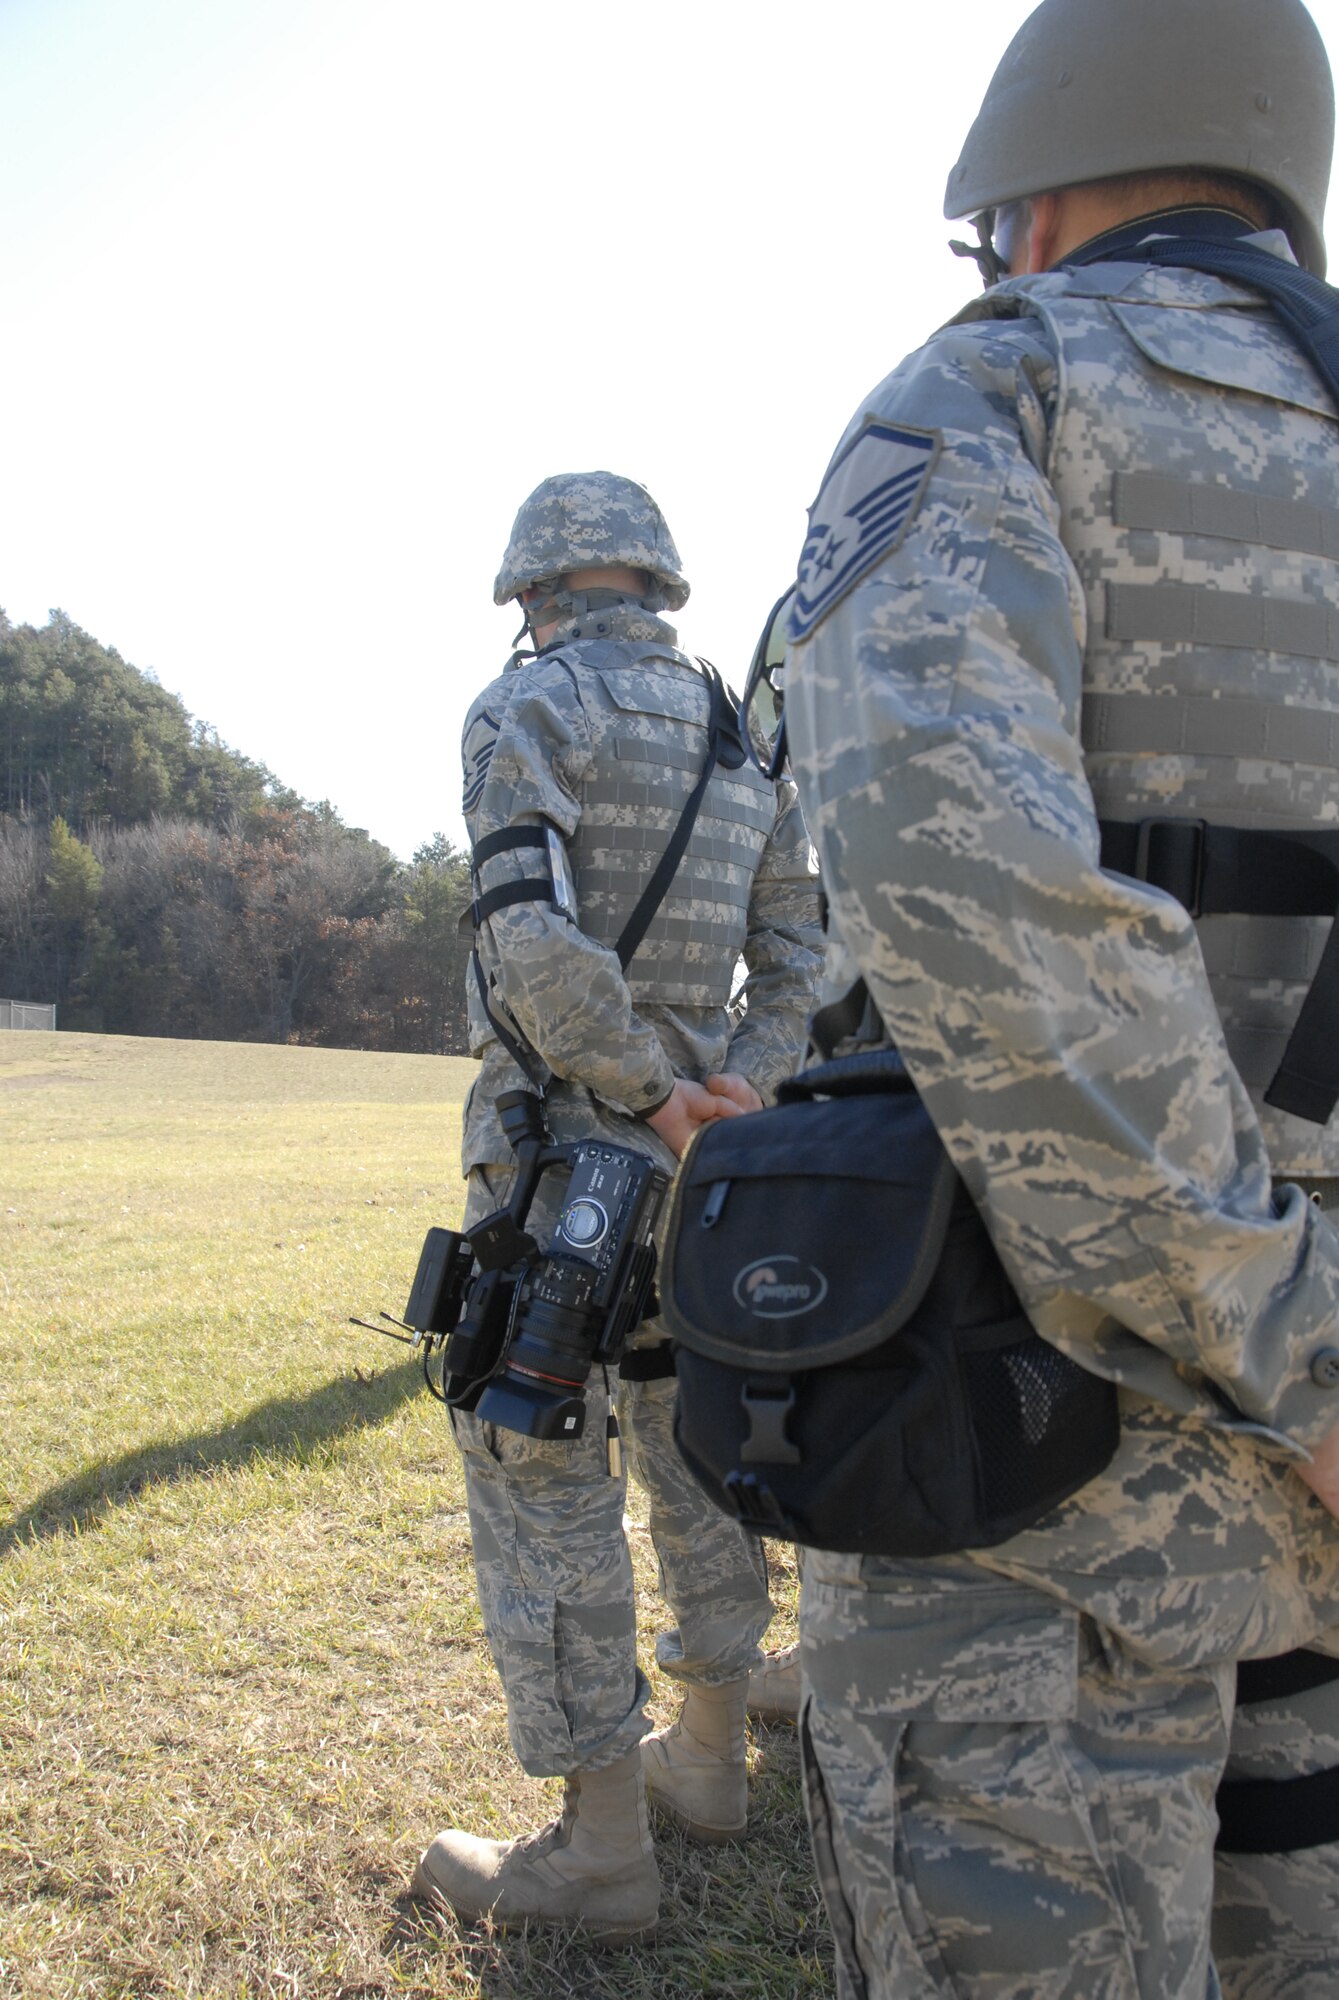 Master Sgt. Paul Gorman (right), along with Master Sgt. Dan Richardson, public affairs personnel from the 115th Fighter Wing in Madison, Wis., form up for roll call during a Security Forces exercise at Volk Field Combat Readiness Training Center Nov. 7, 2009. Three public affairs personnel from the 115th embedded with their own Security Forces to learn how to effectively operate under the pressures of a combat environment.  The training proved beneficial to both sides as SF members learned ways to protect embedded assets while performing their regular duties.  (U.S. Air Force Photo by Tech. Sgt. Don Nelson) 